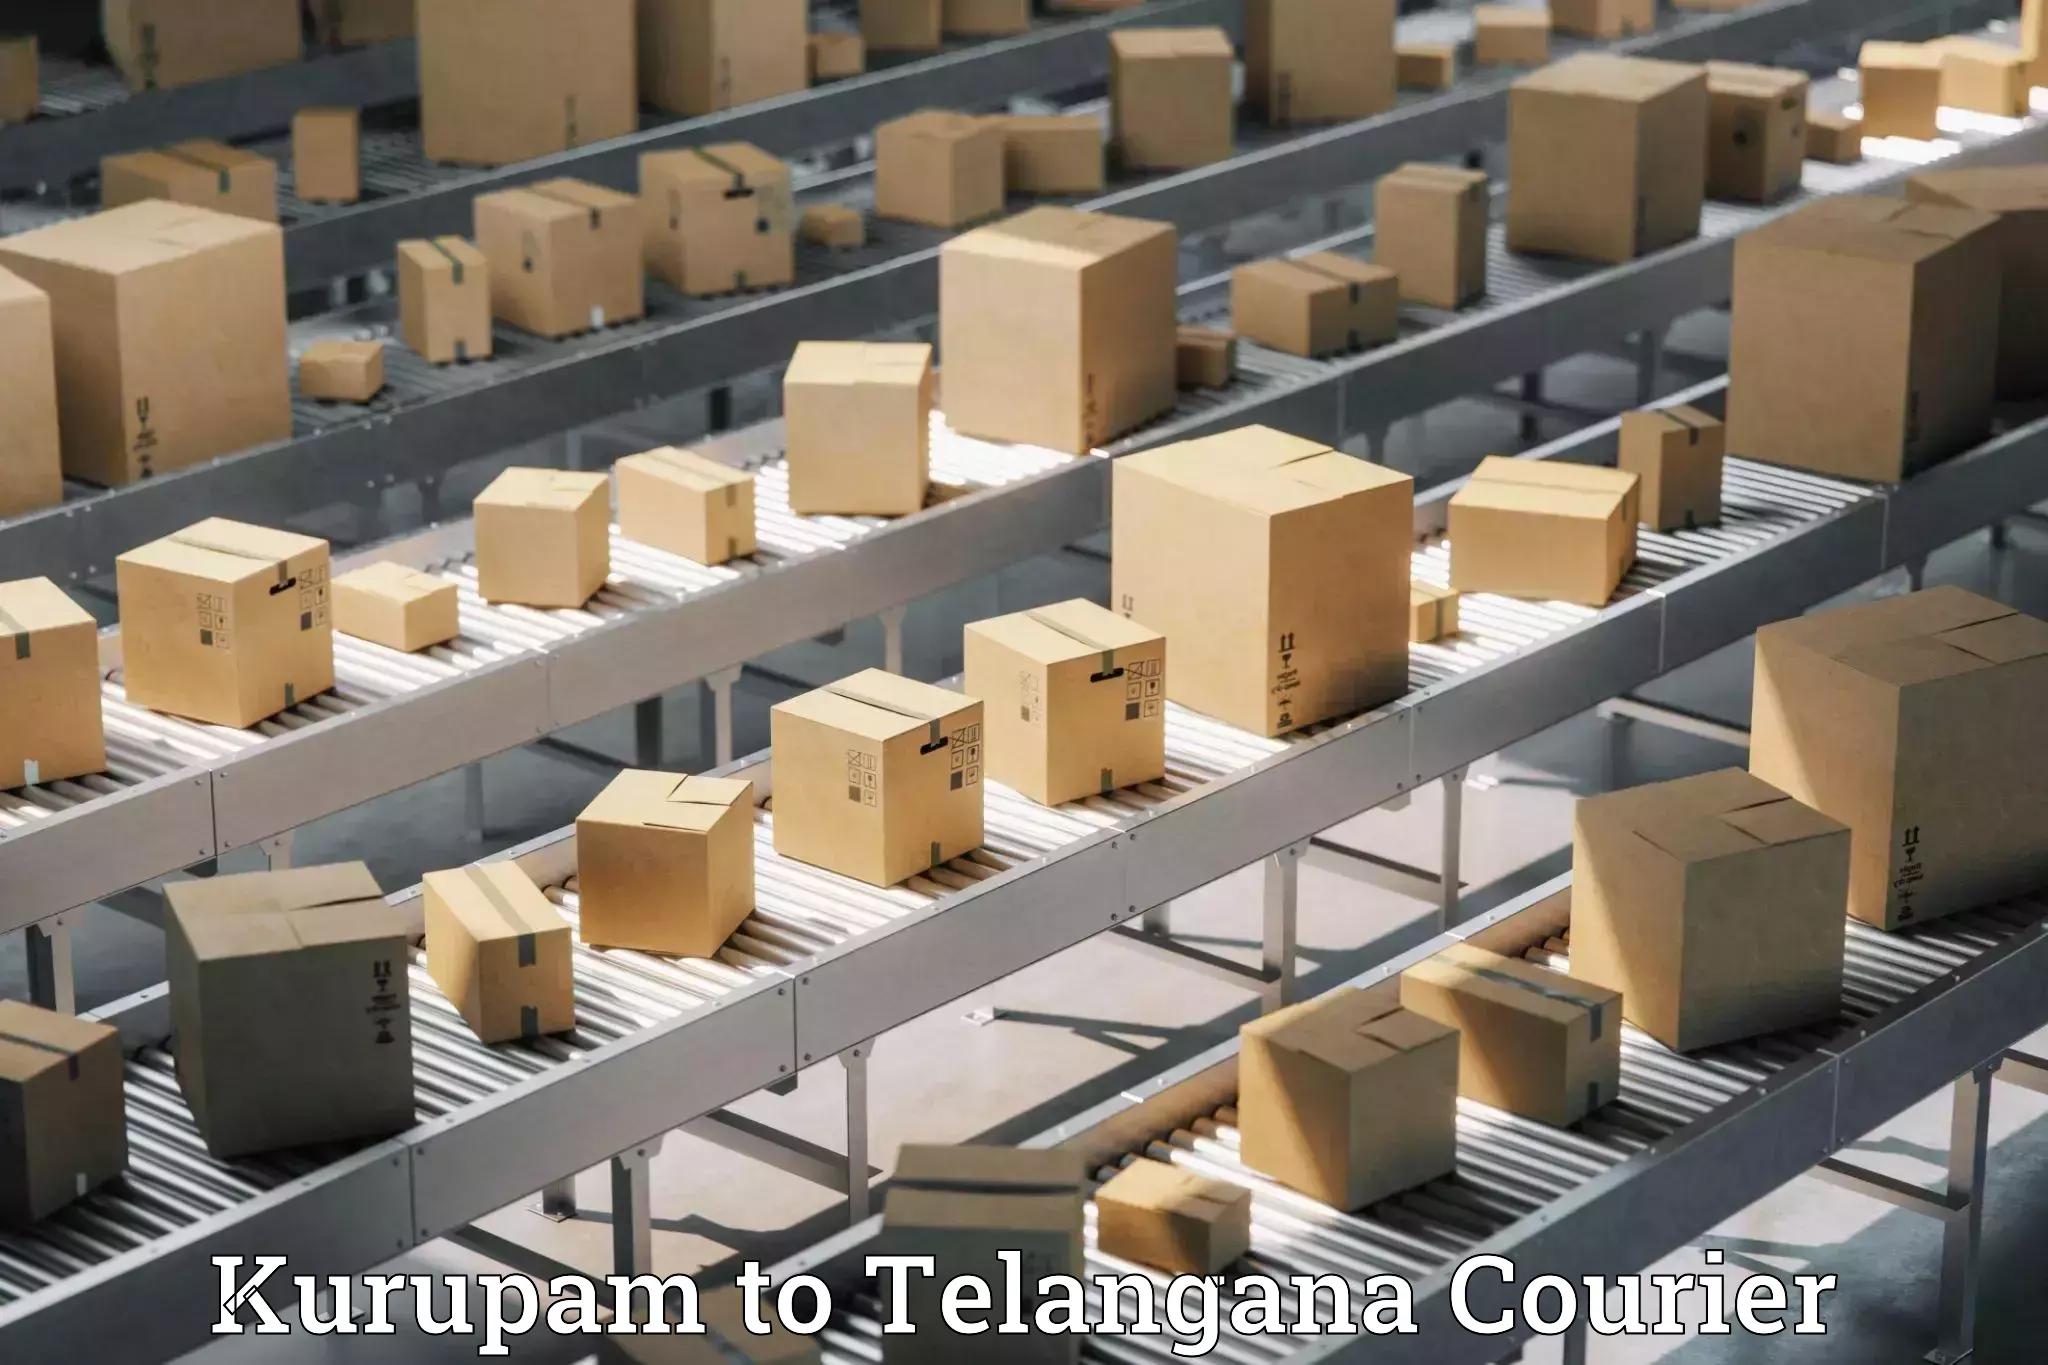 Personal parcel delivery in Kurupam to Shadnagar